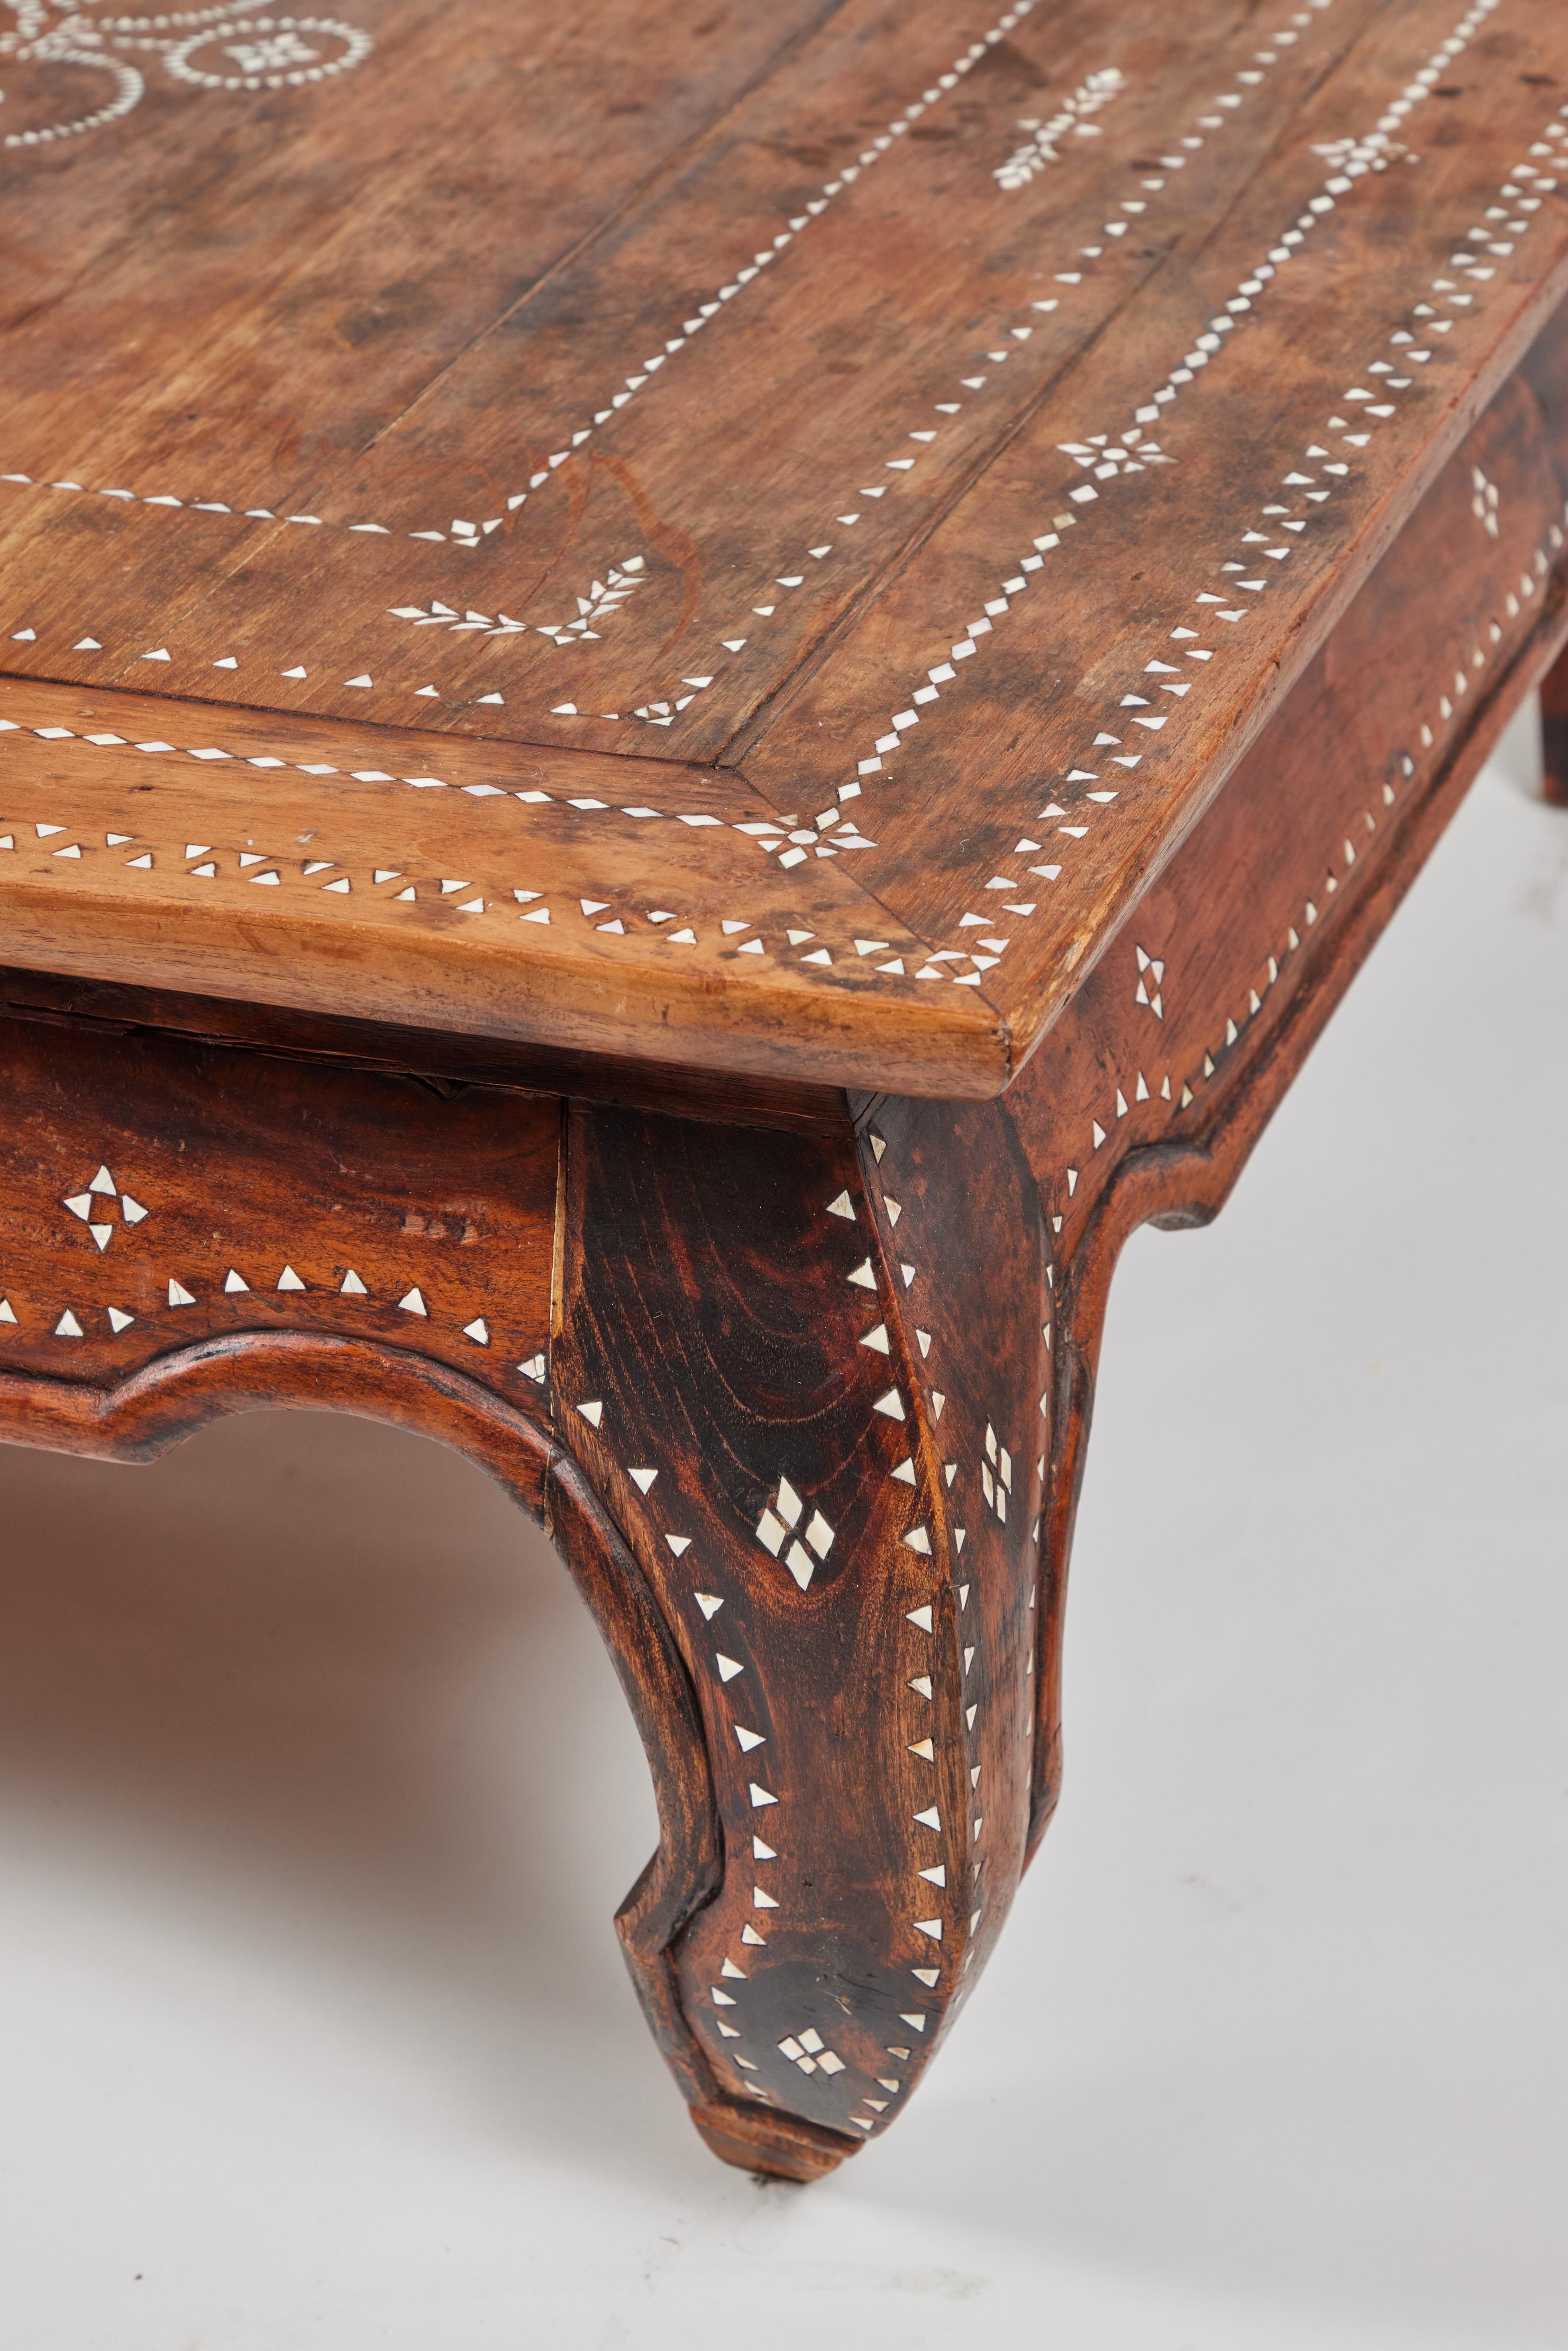 Indian Large Vintage Hand-Carved Inlaid Square Wood Coffee Table 